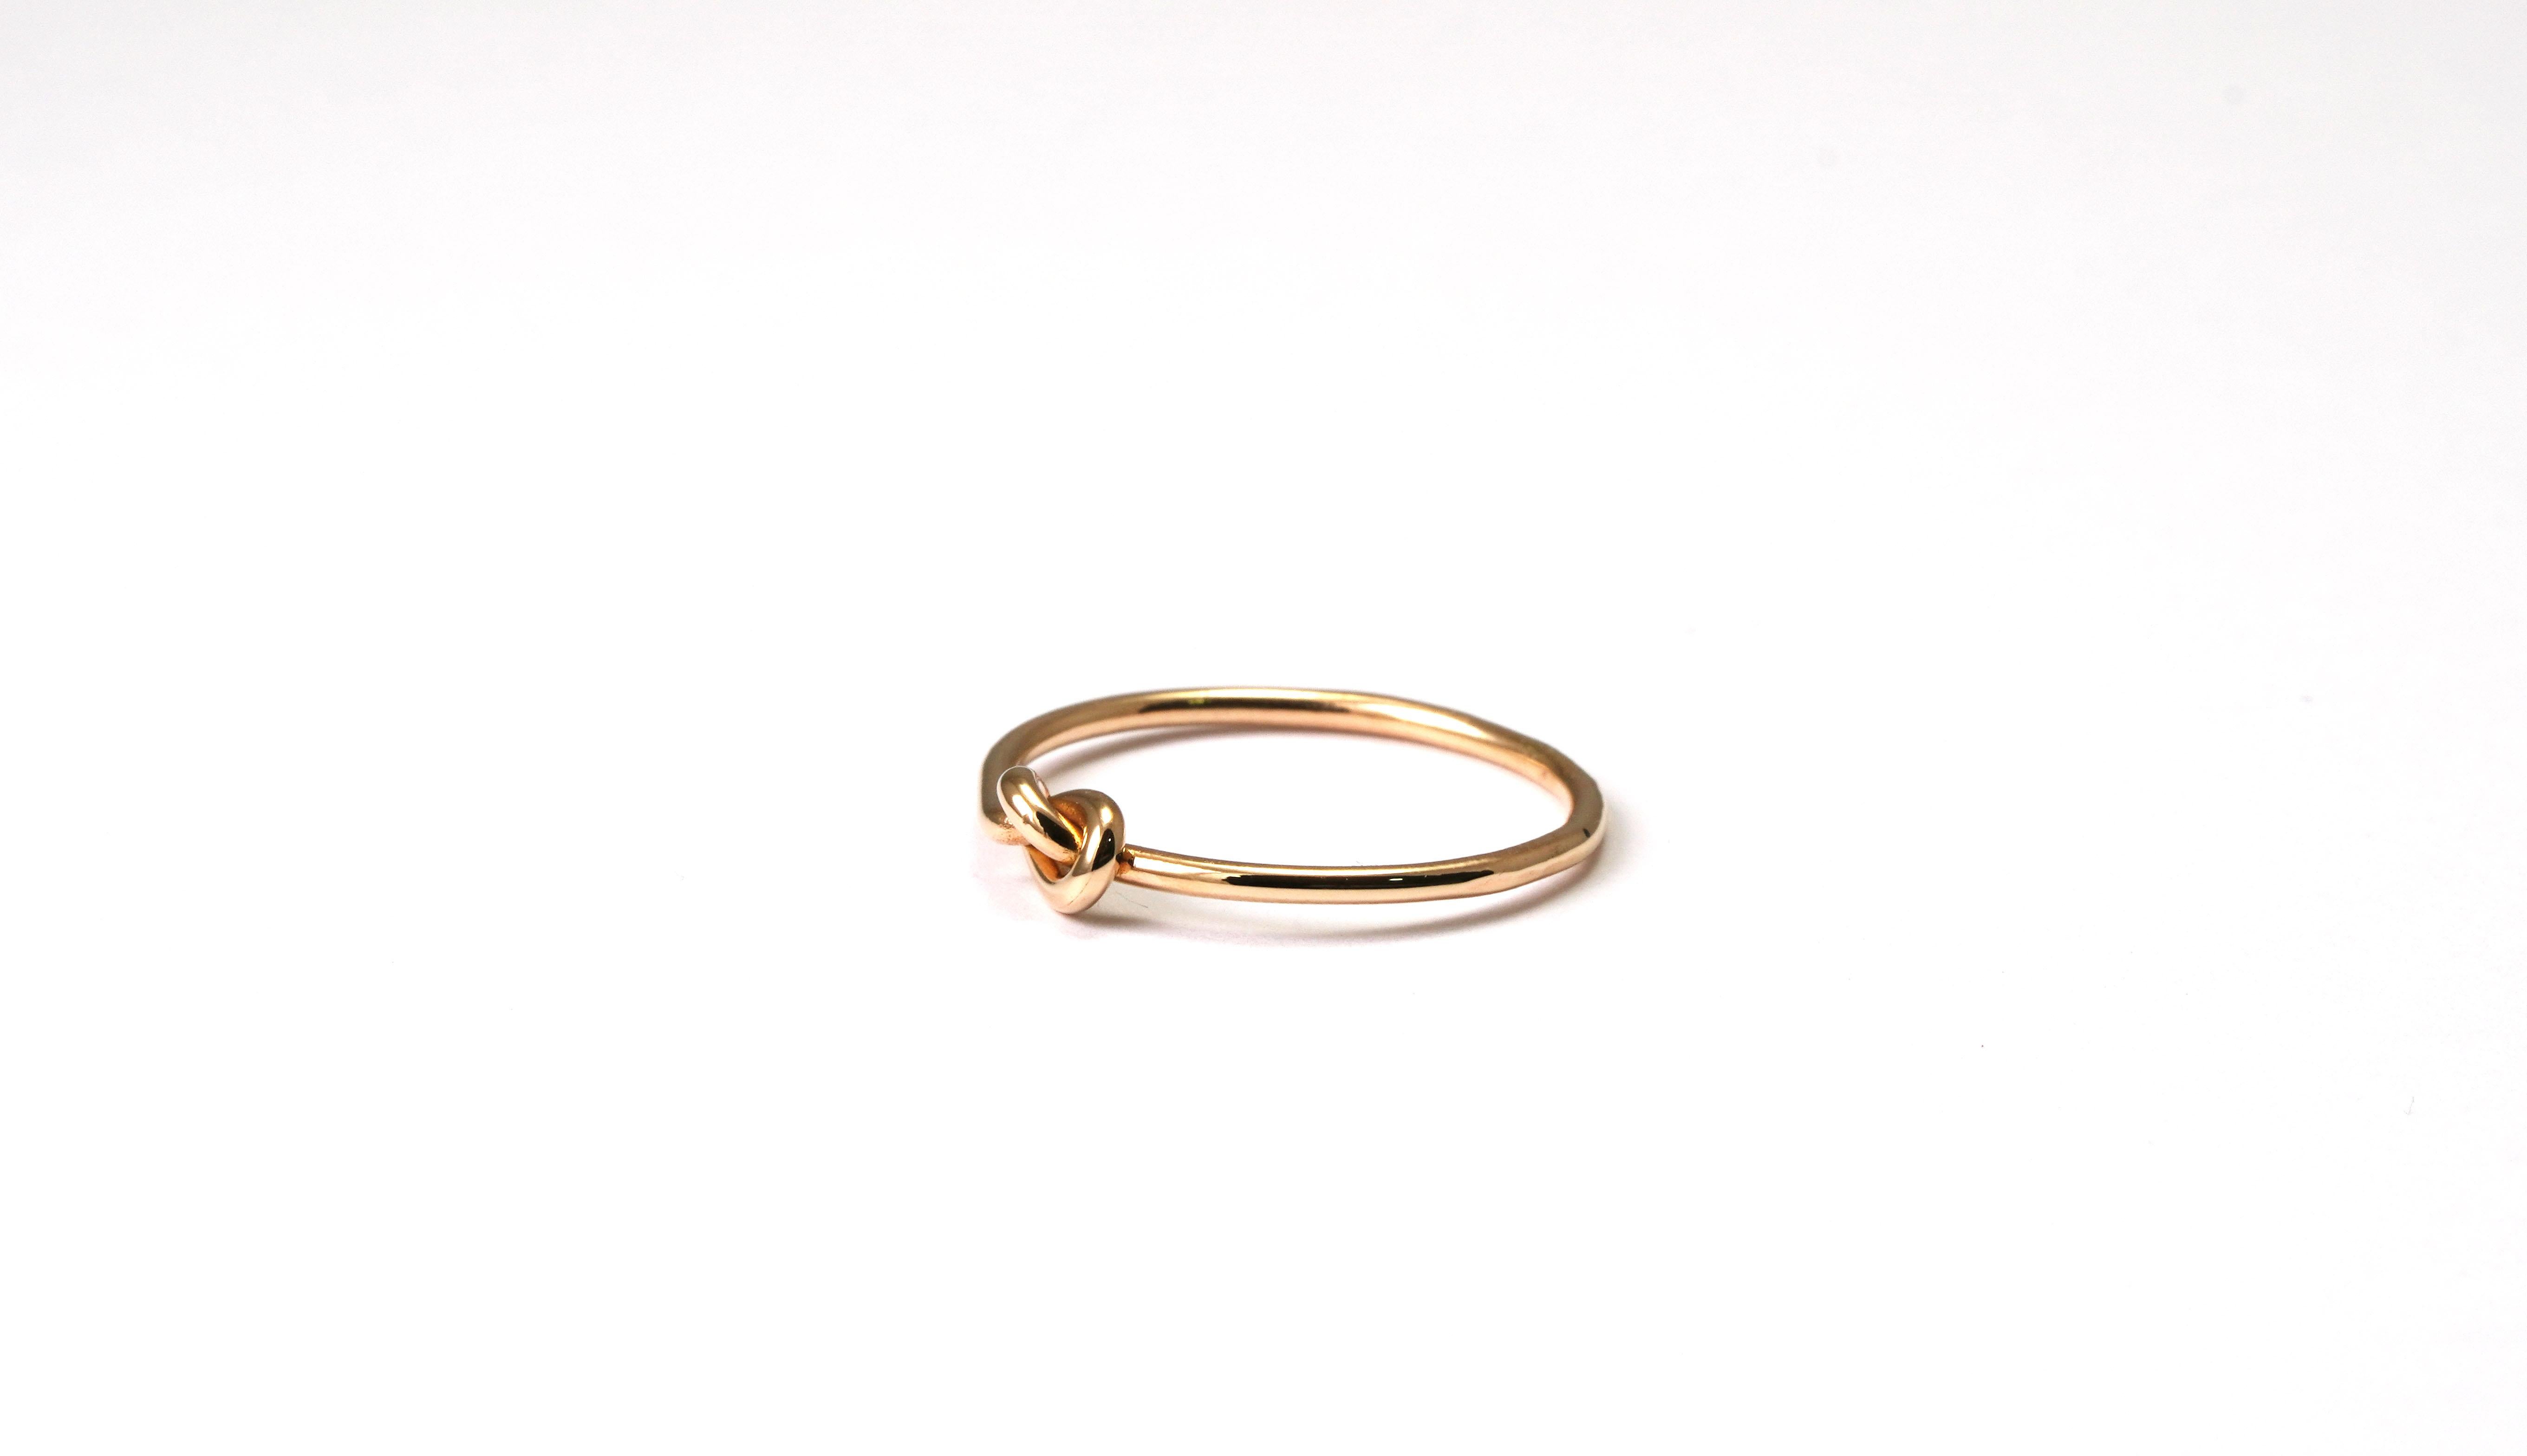 Elegant Handmade 18 kt Yellow Gold Ring
Gold color: Yellow
Size: 5
Total weight: 0.99 grams